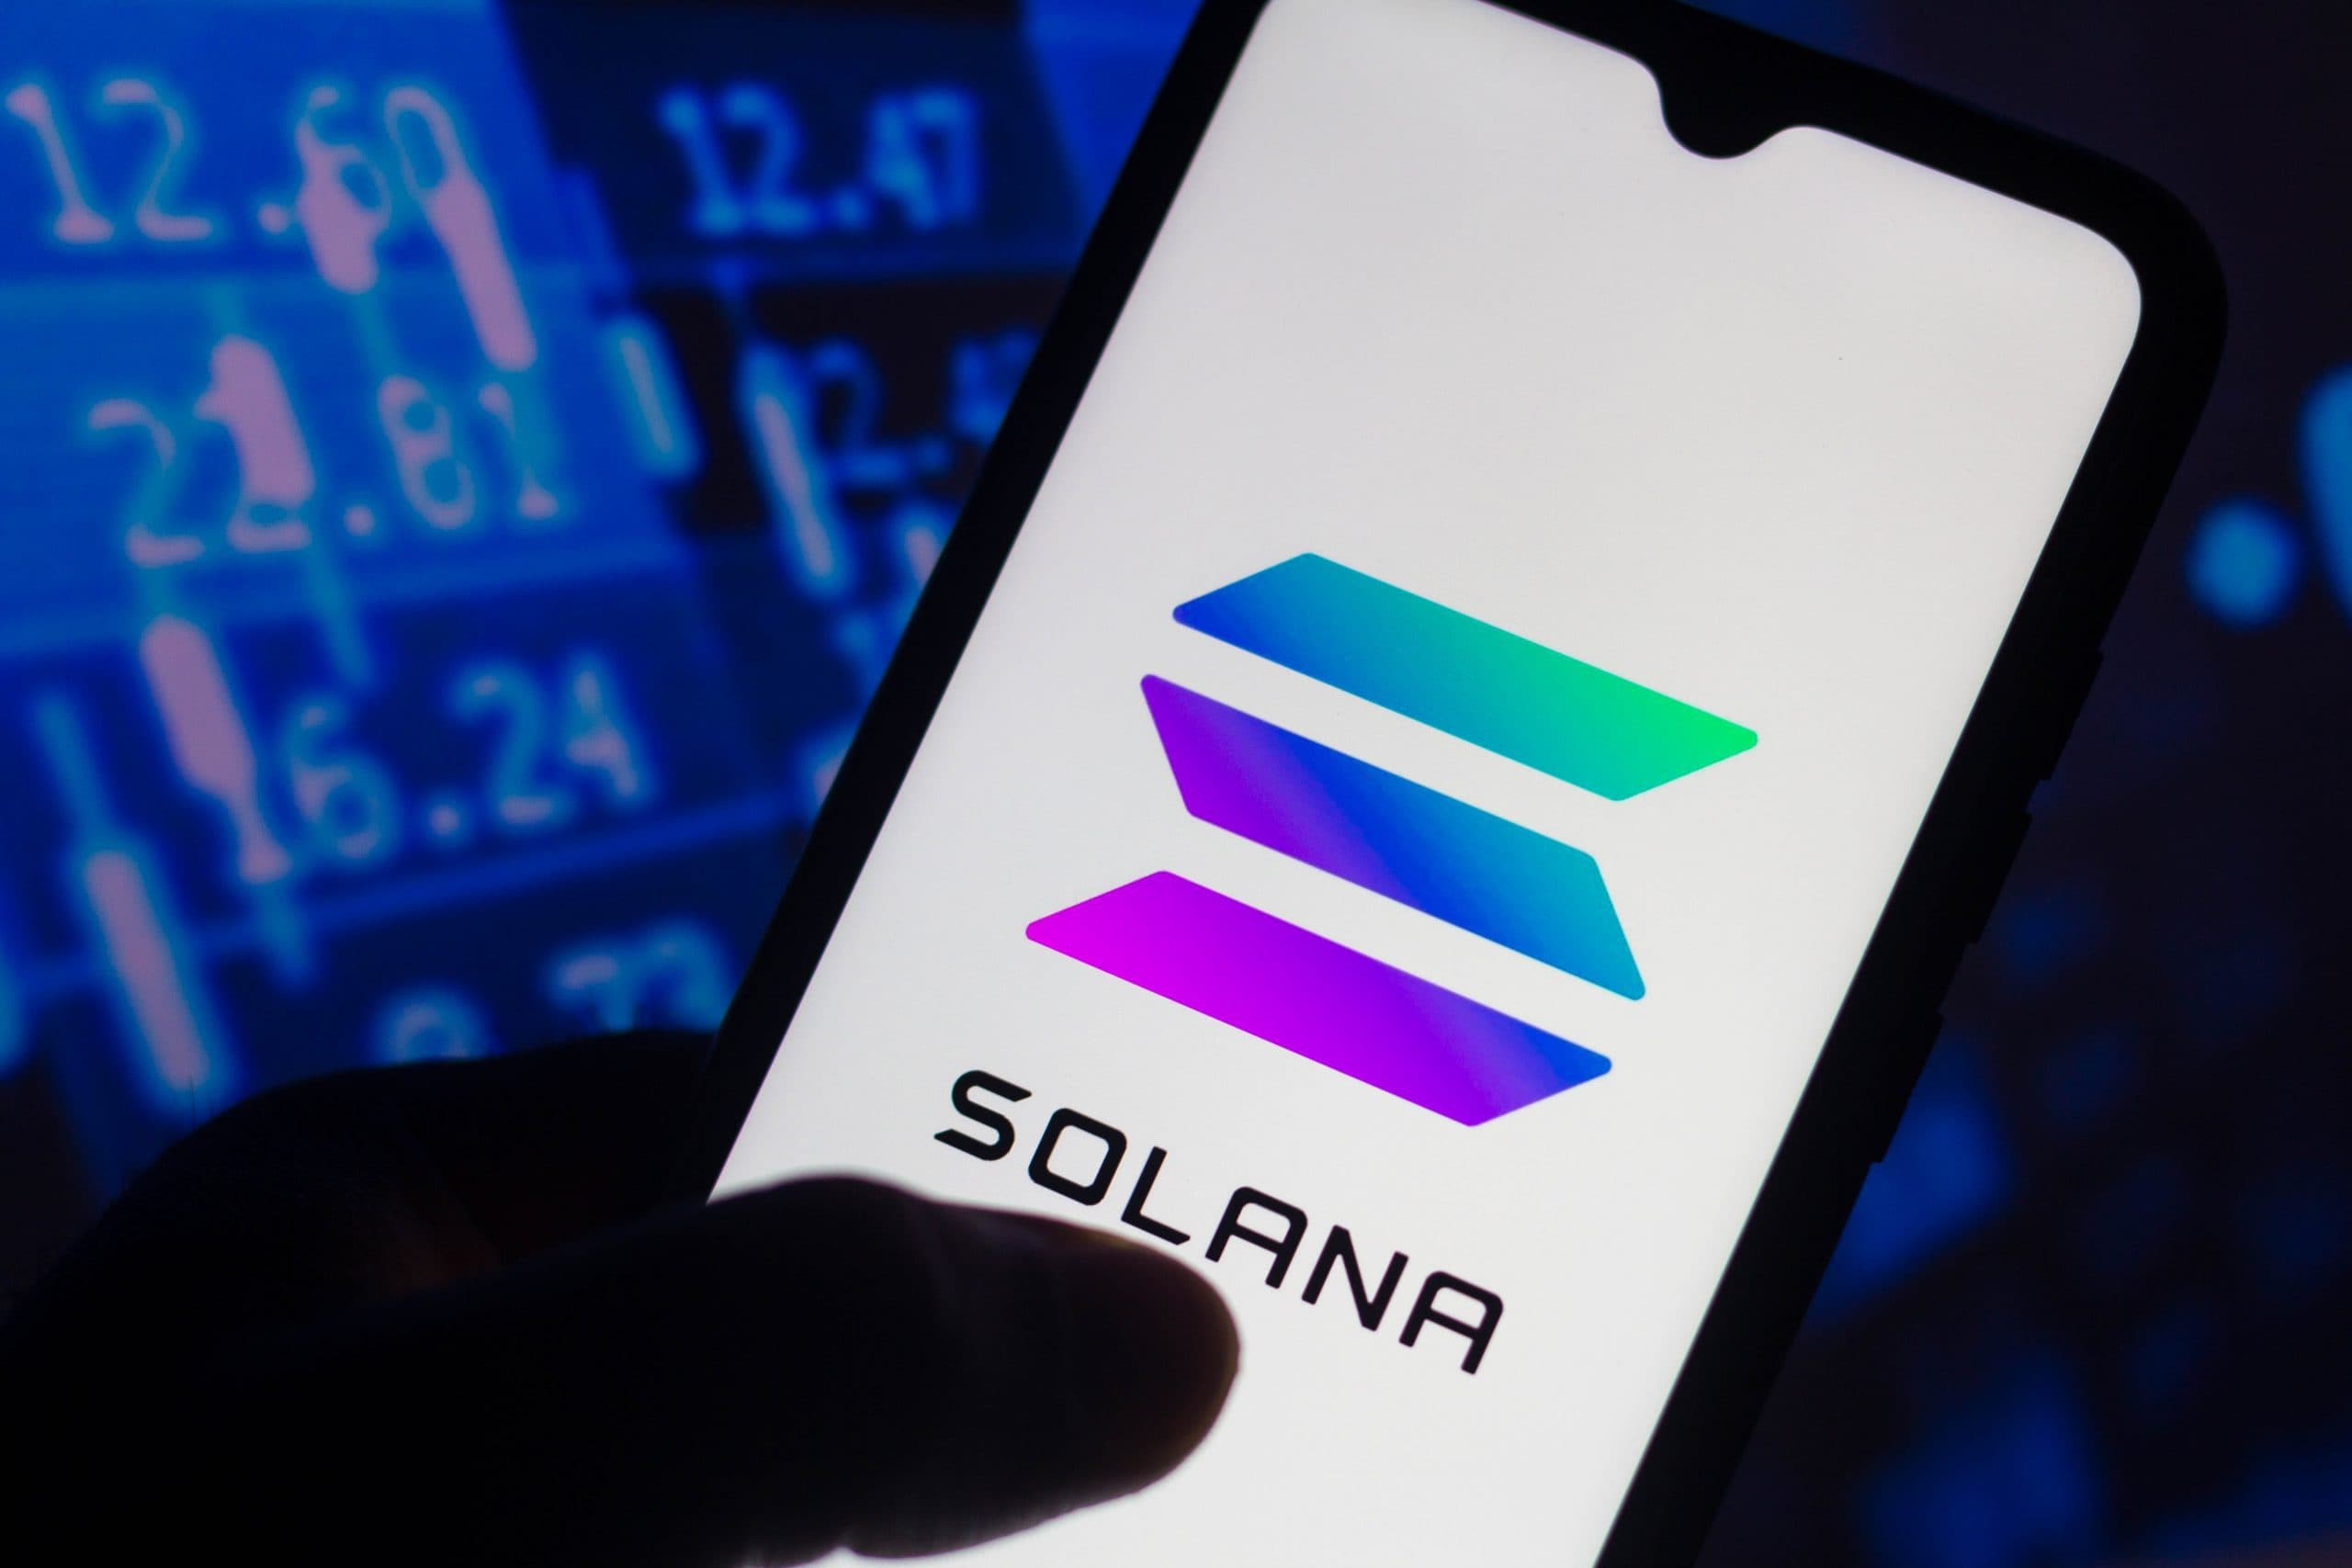 FTX builds its own NFT marketplace on Solana